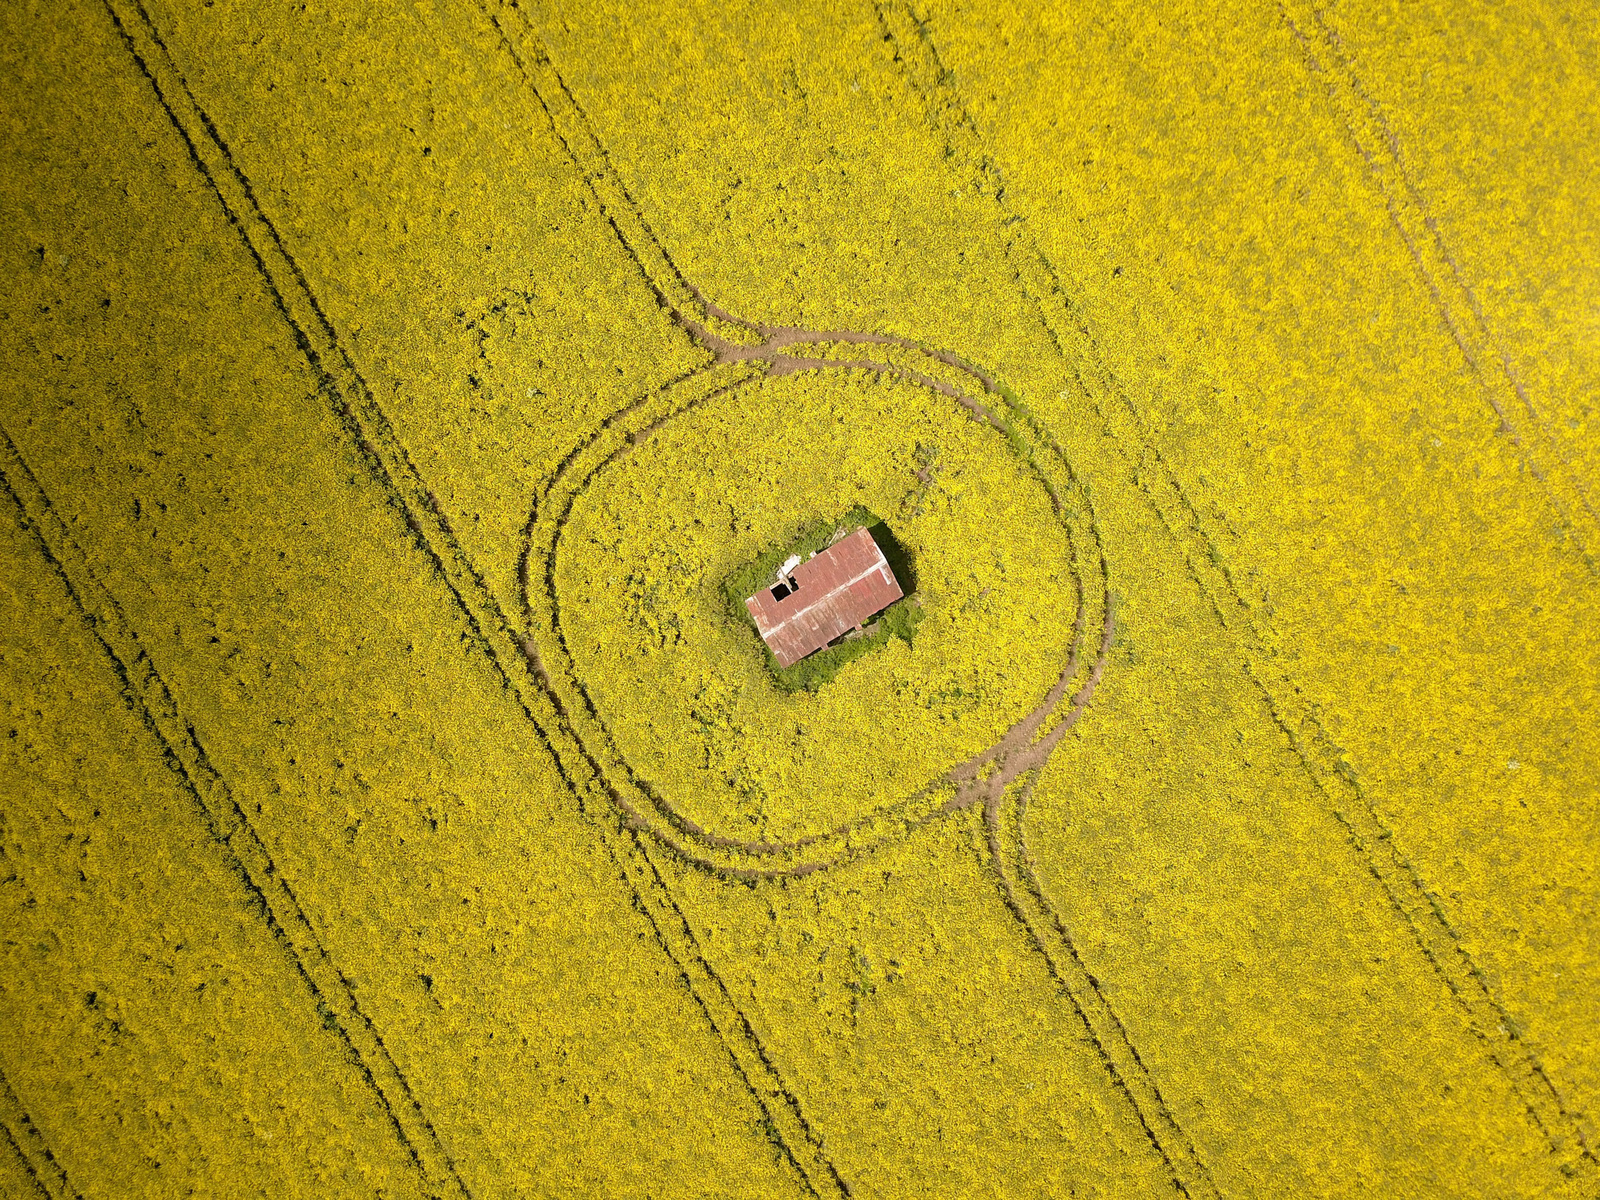 Gulyas Balint - Ruined house in a rapeseed field - UK -2019